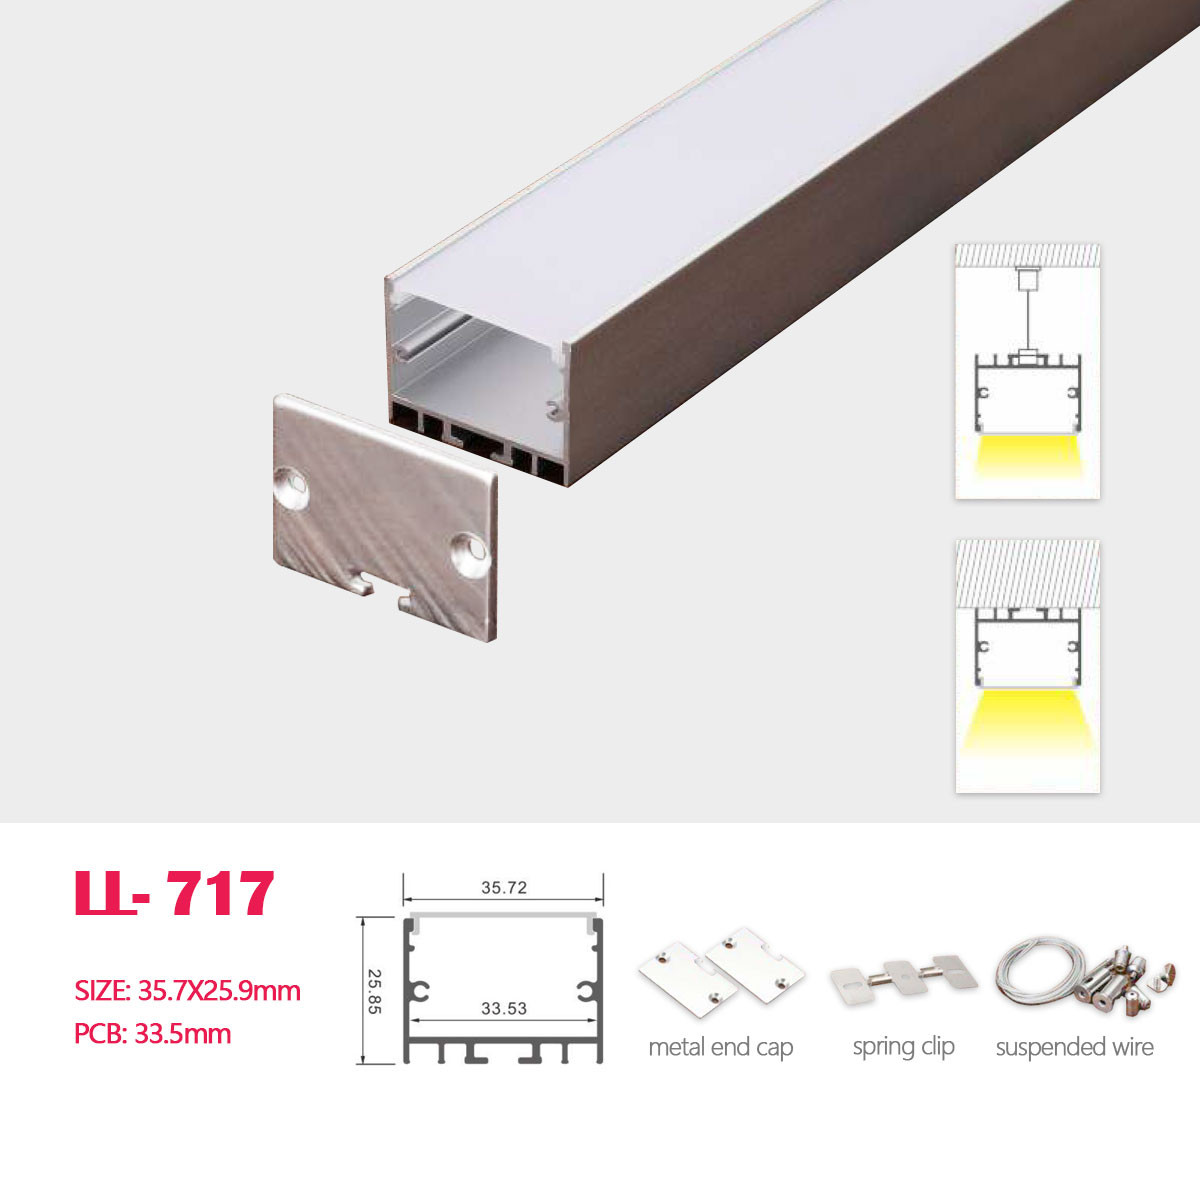 1M(3.28FT) 35.7MM*25.9MM  LED U-Shape Aluminum Profile with Flat Cover，Metal End Cap,Spring Clips and Suspended Wire for Hanging or Surface mounted LED Strip Light Application